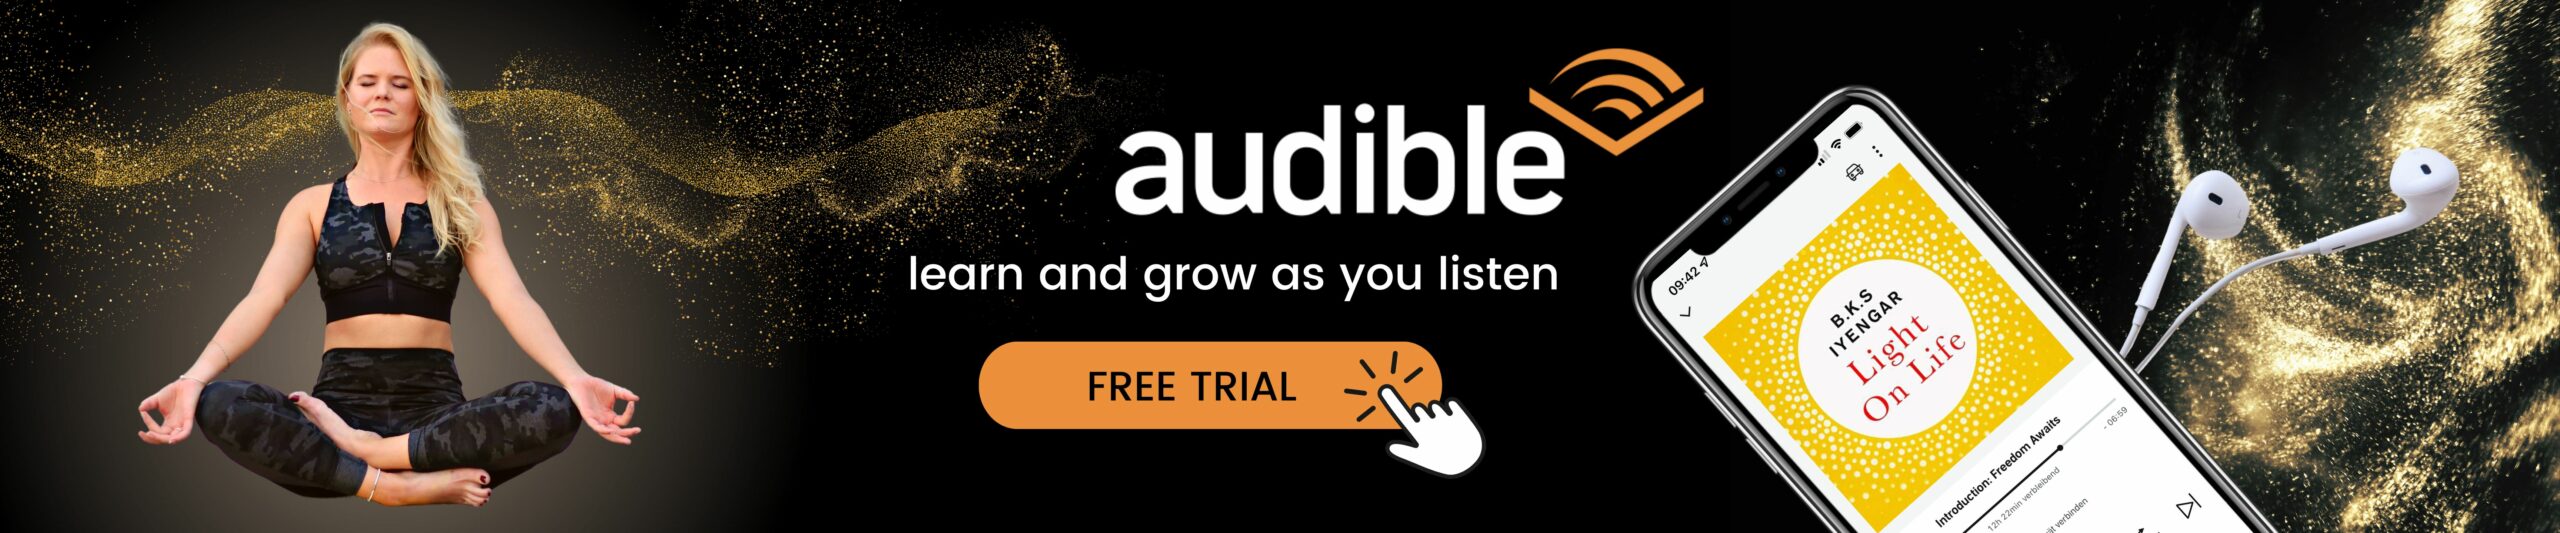 audible free trial banner